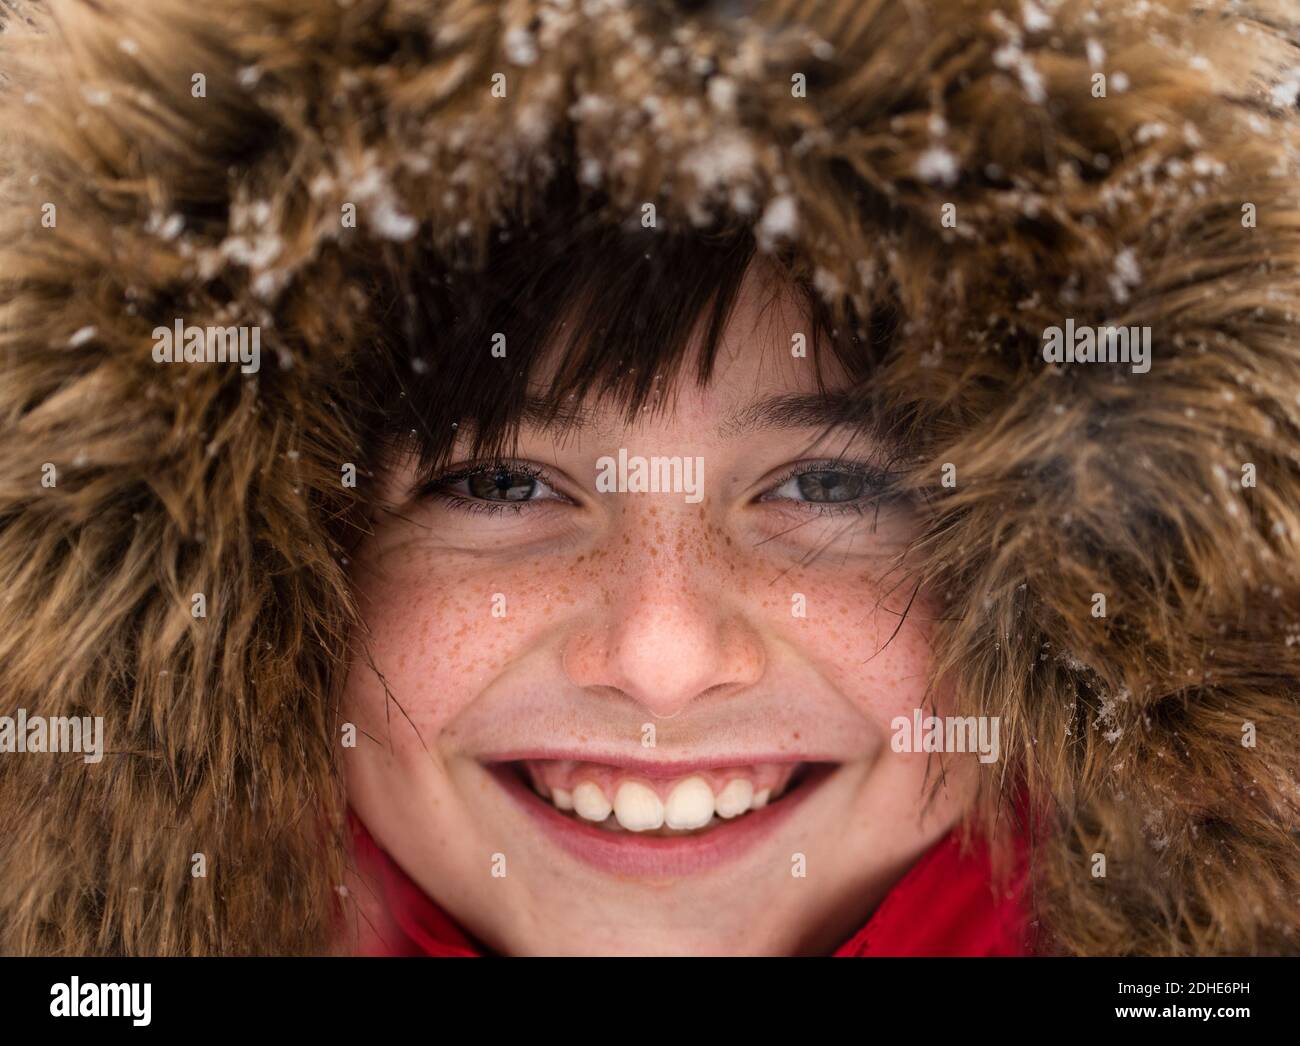 Close Up Of Cute Smiling Boy In Fur Trimmed Hood On A Snowy Day Stock